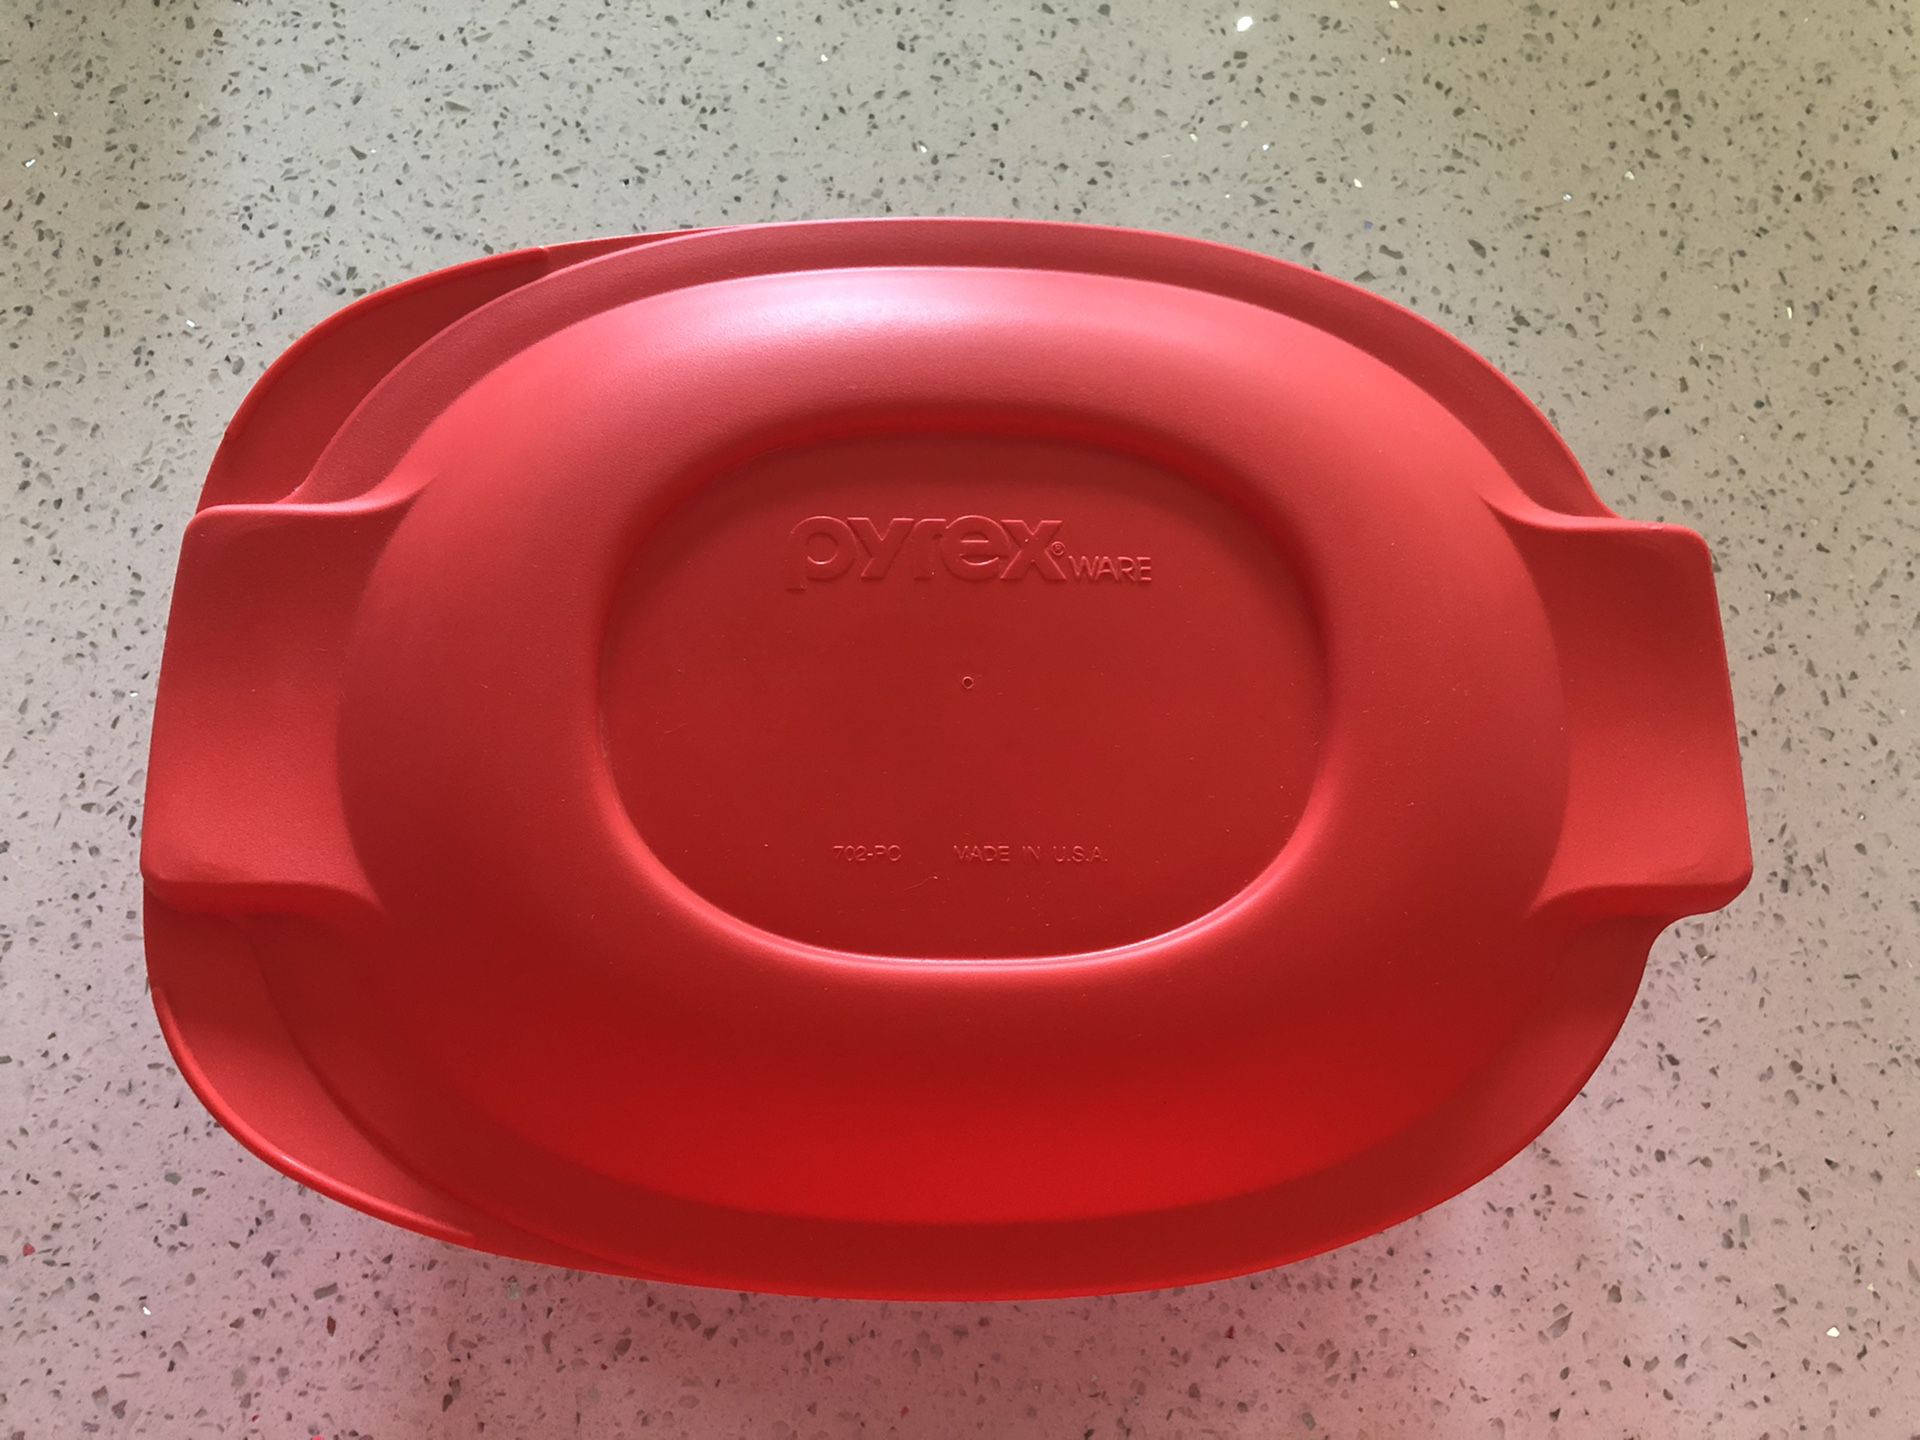 Brand new Pyrex bowl with lid - 2.5 qt